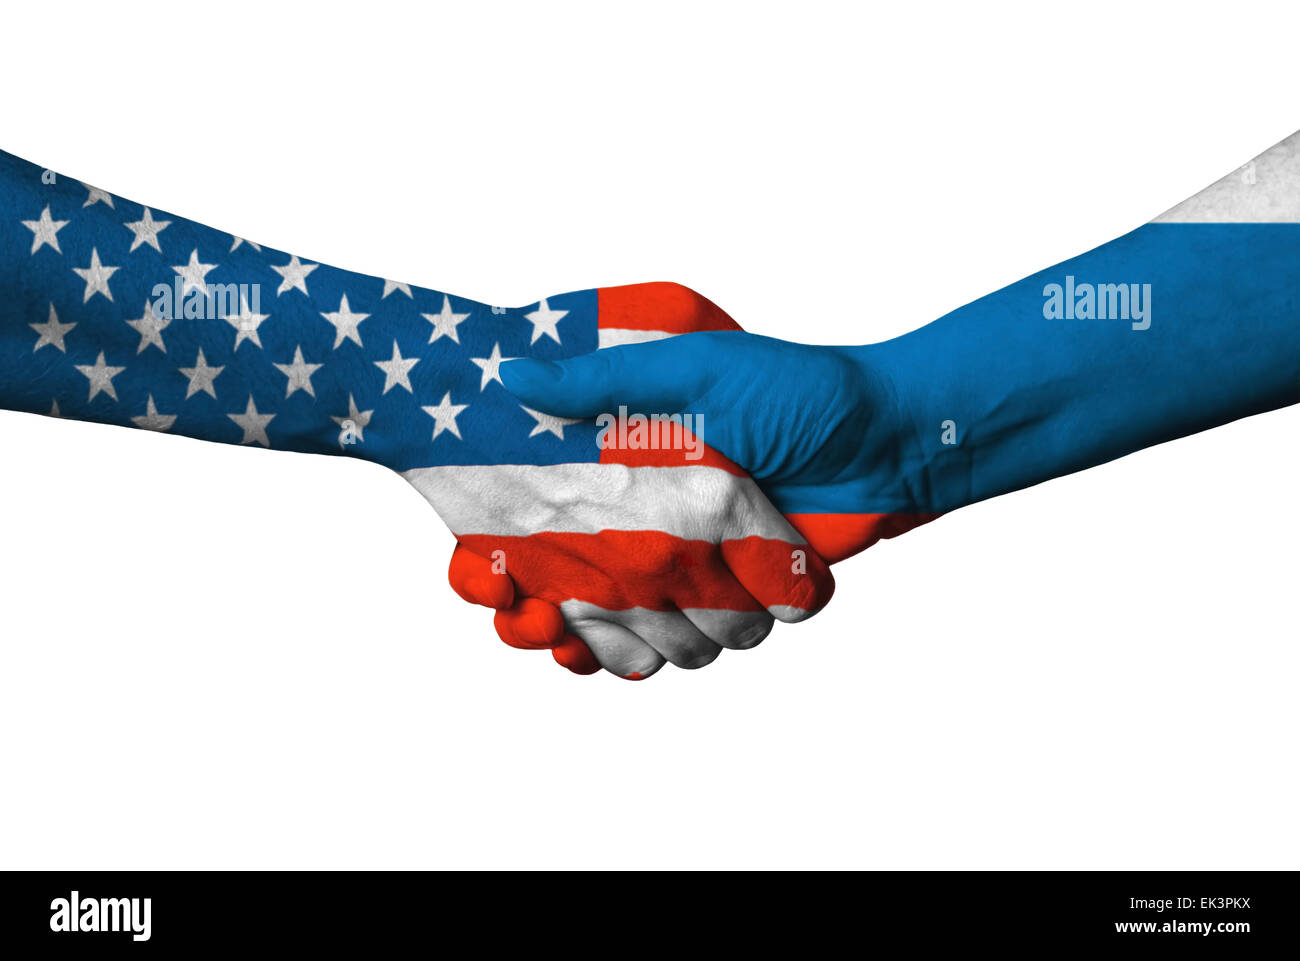 USA and Russian flag across handshake isolated on white background. Stock Photo